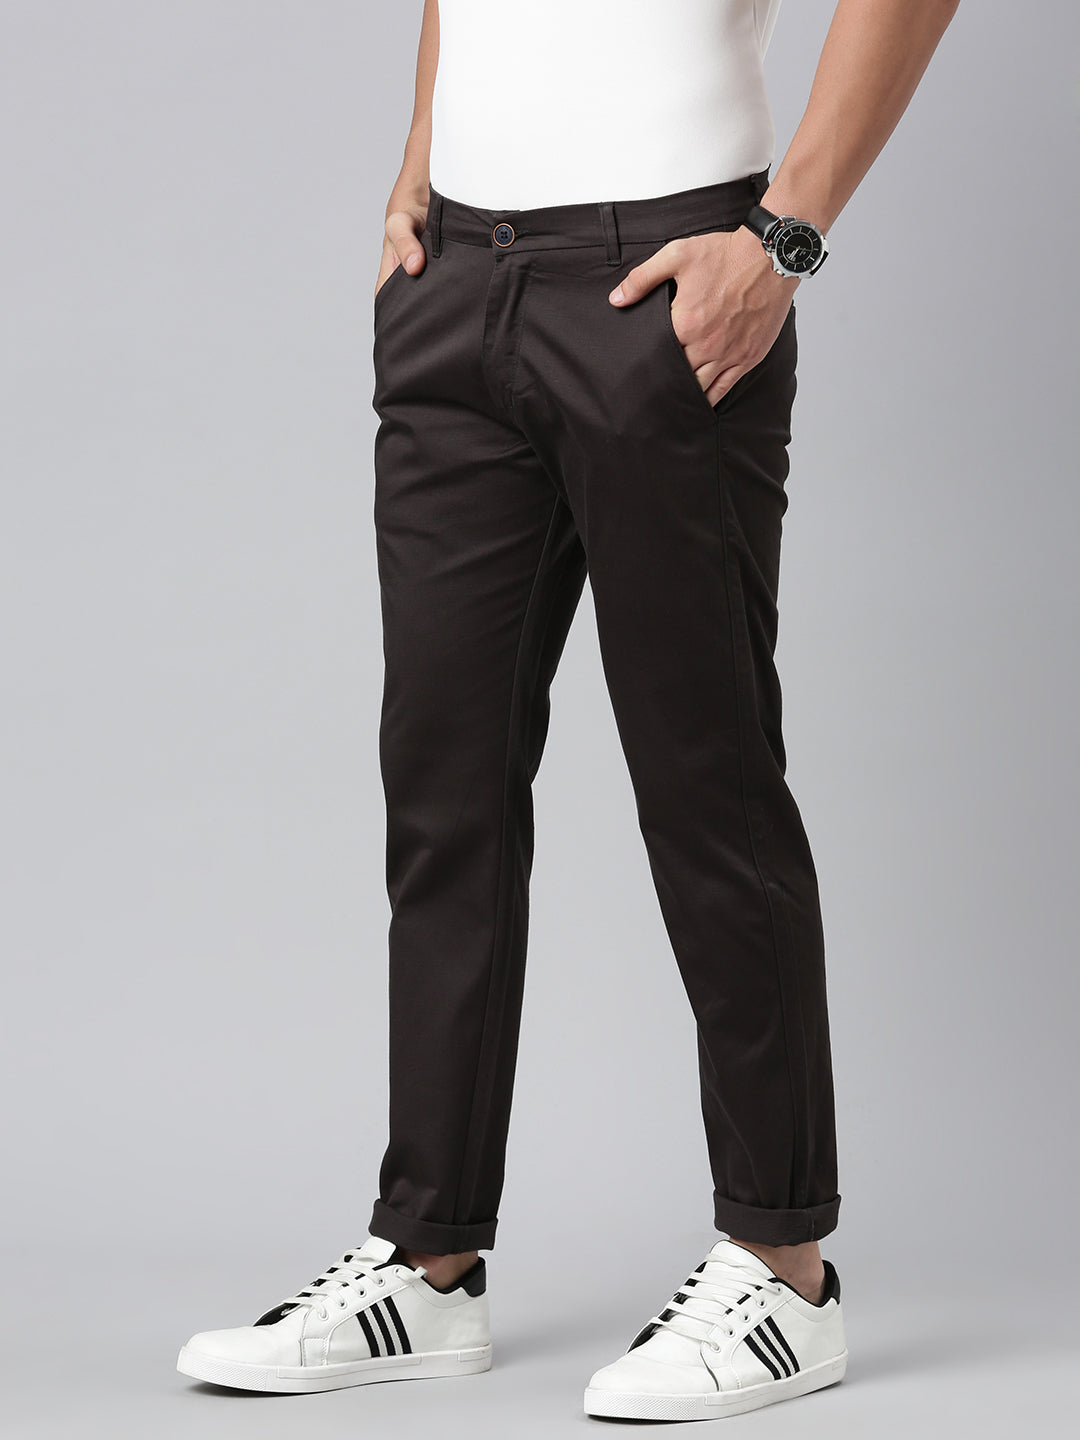 Classic Men's Trousers for Effortless Style - Jet Grey